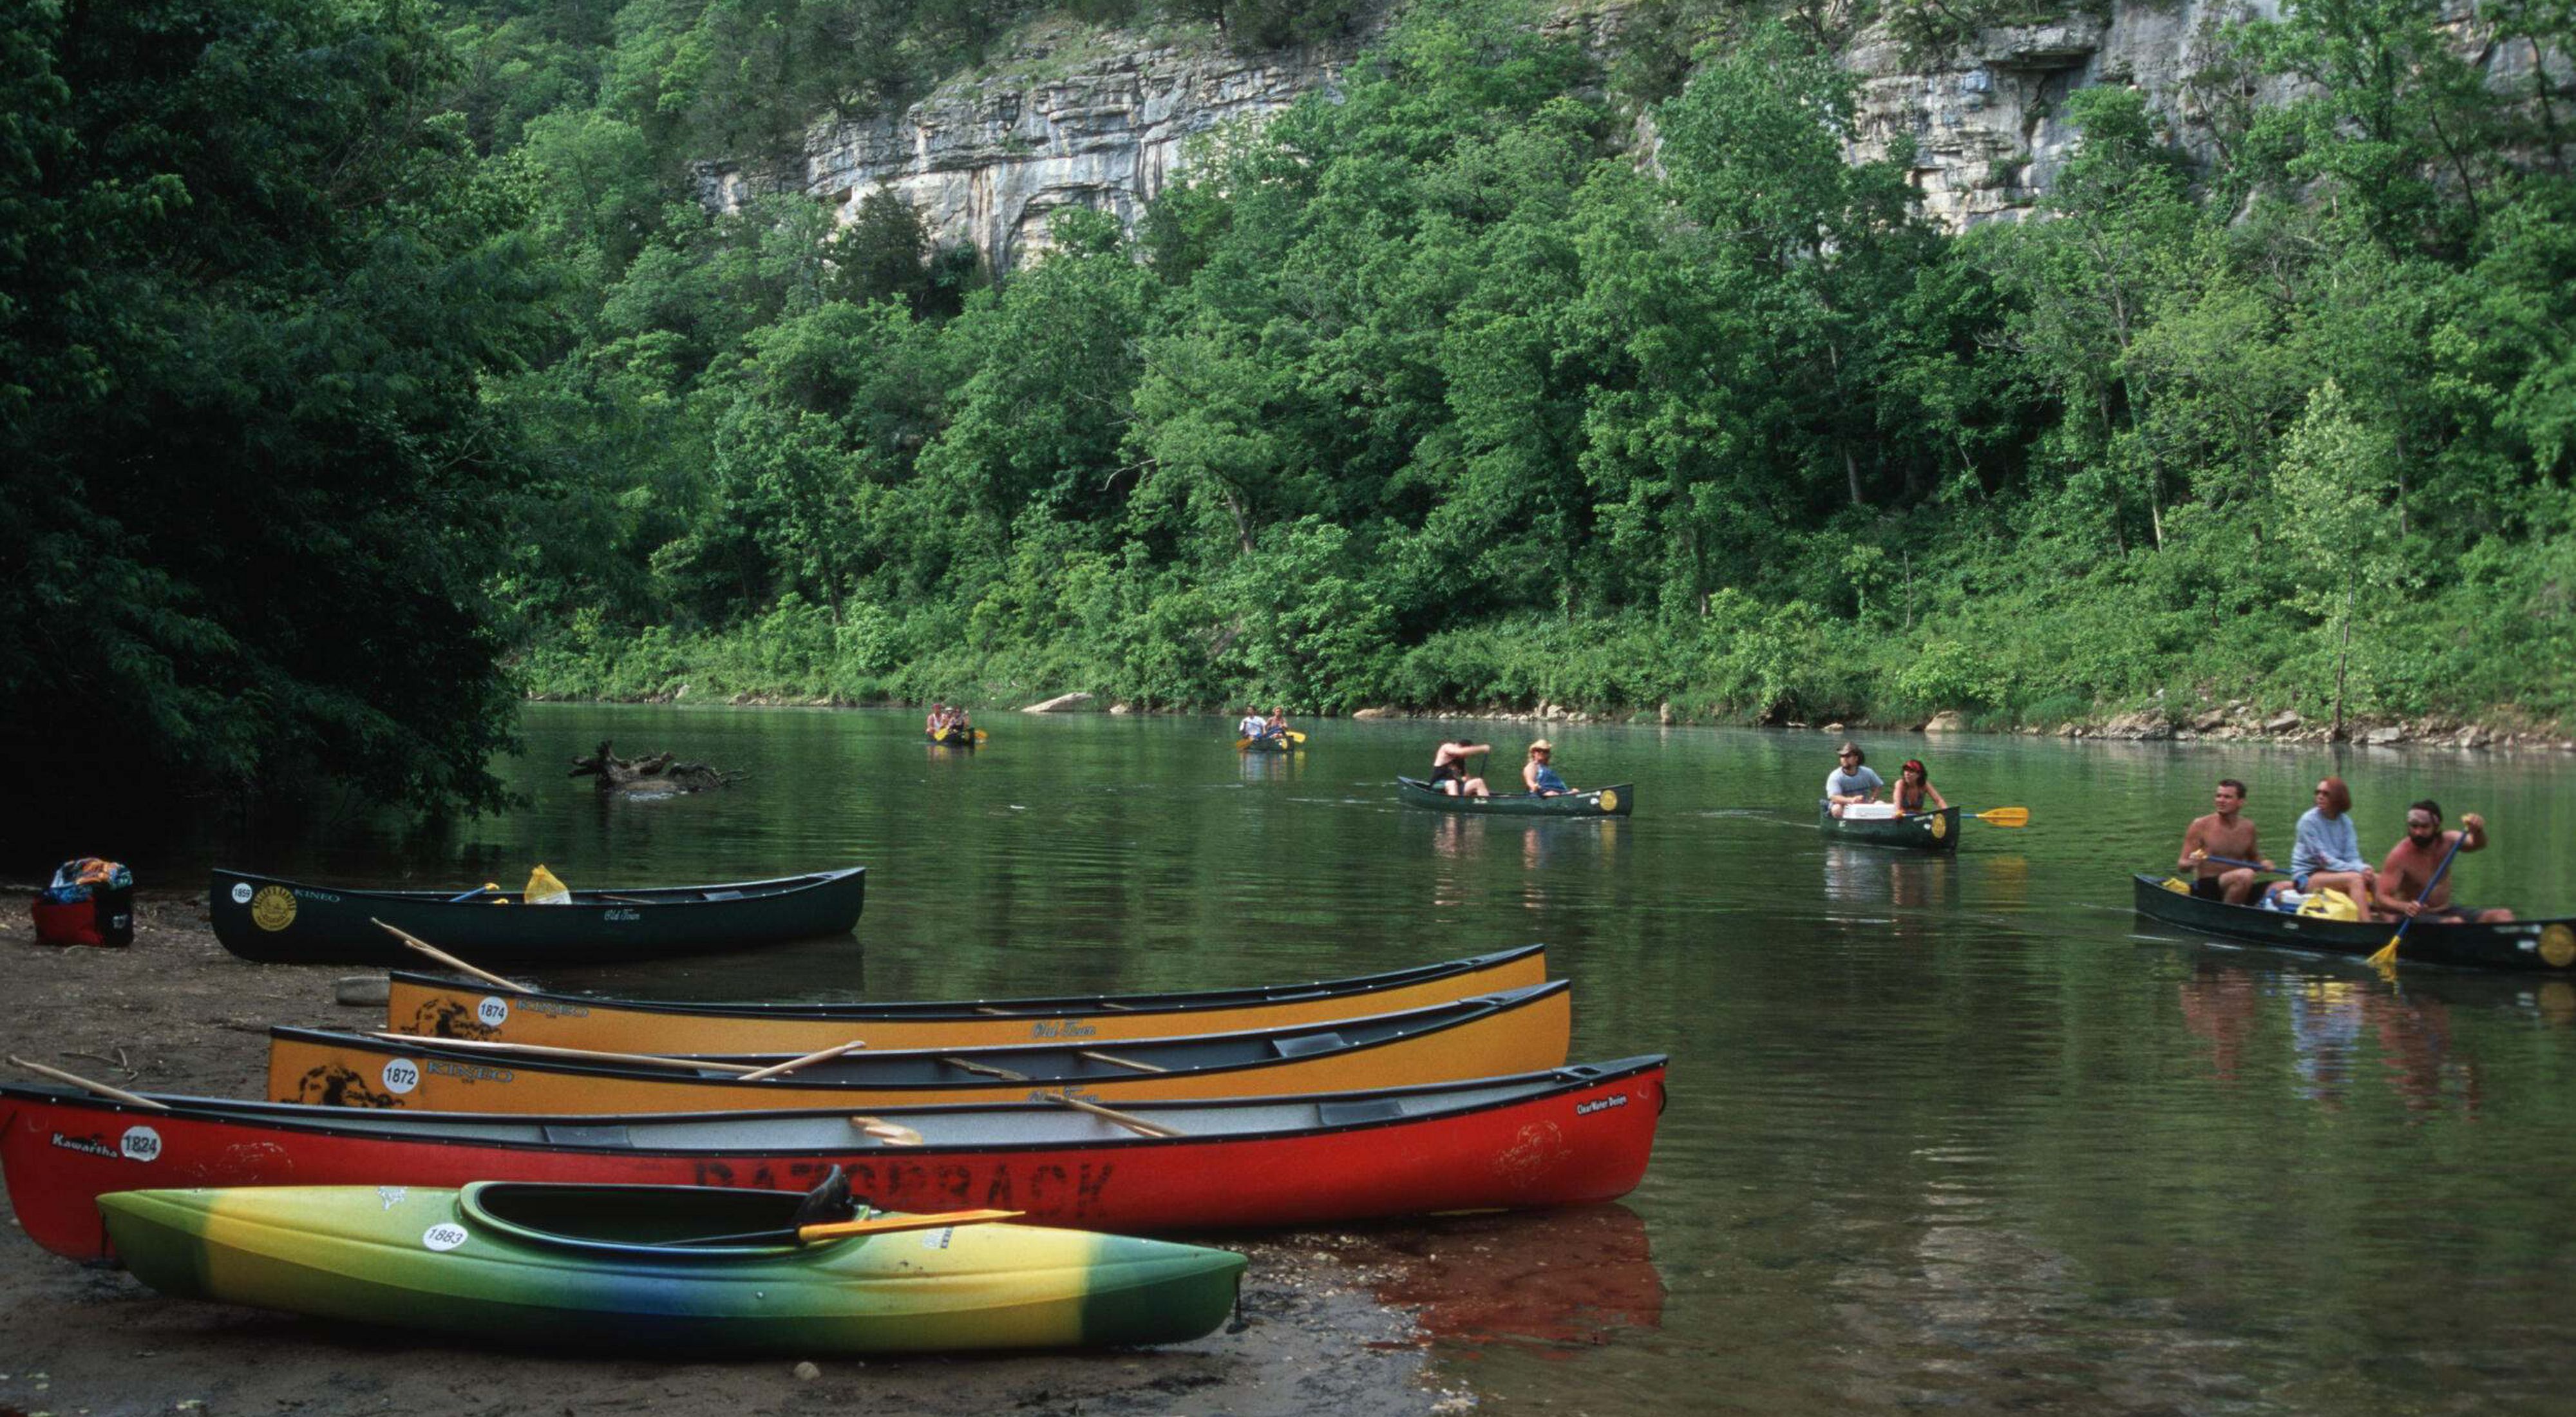 Canoeists on a river lined by trees and a cliff.